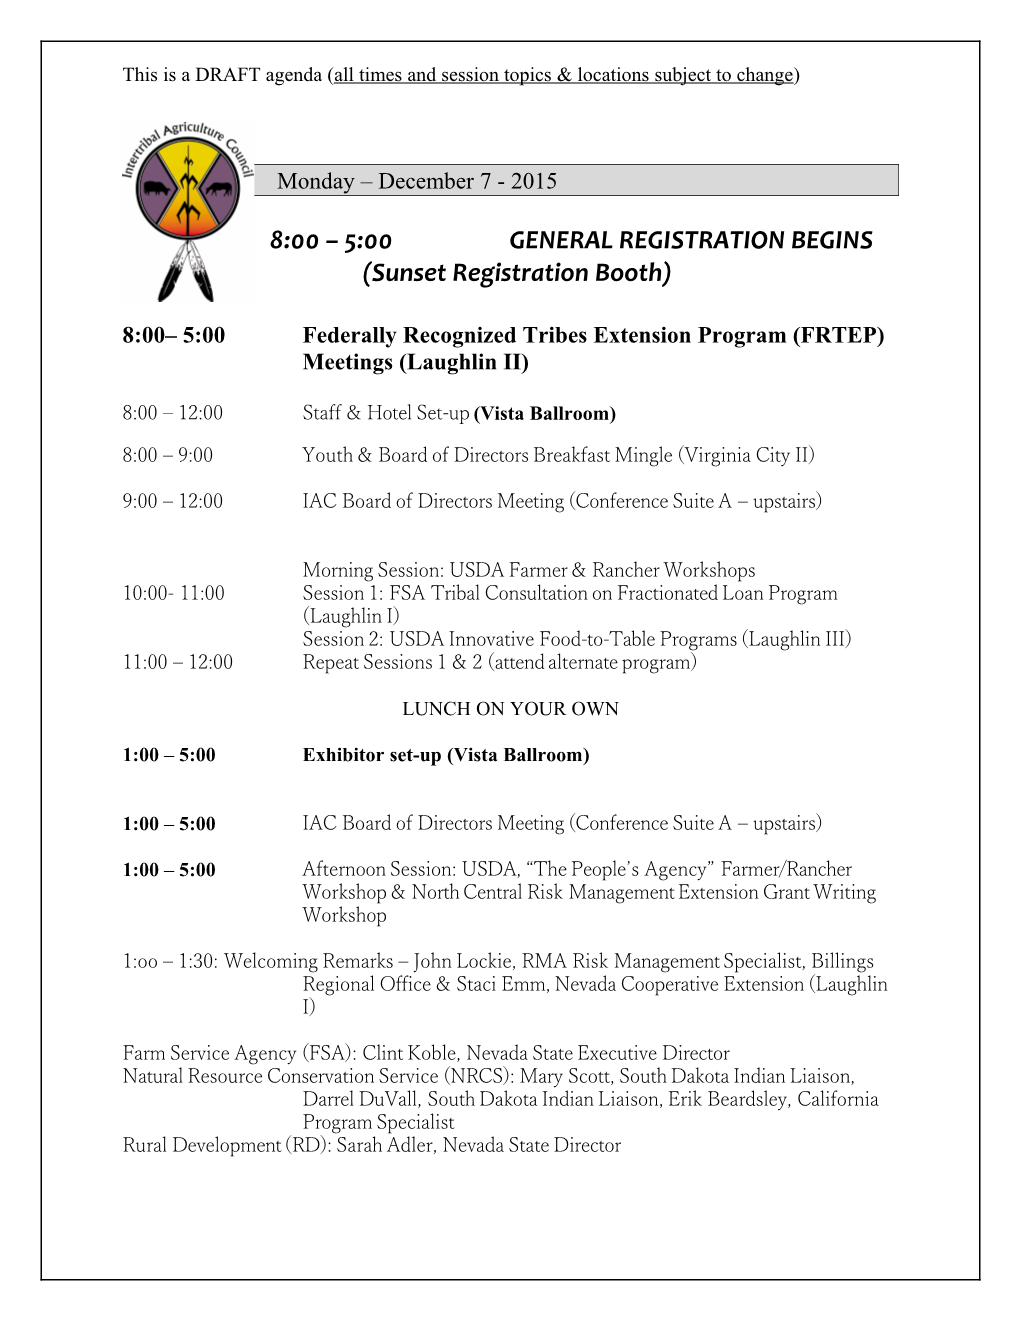 8:00 5:00Federally Recognized Tribes Extension Program (FRTEP) Meetings (Laughlin II)